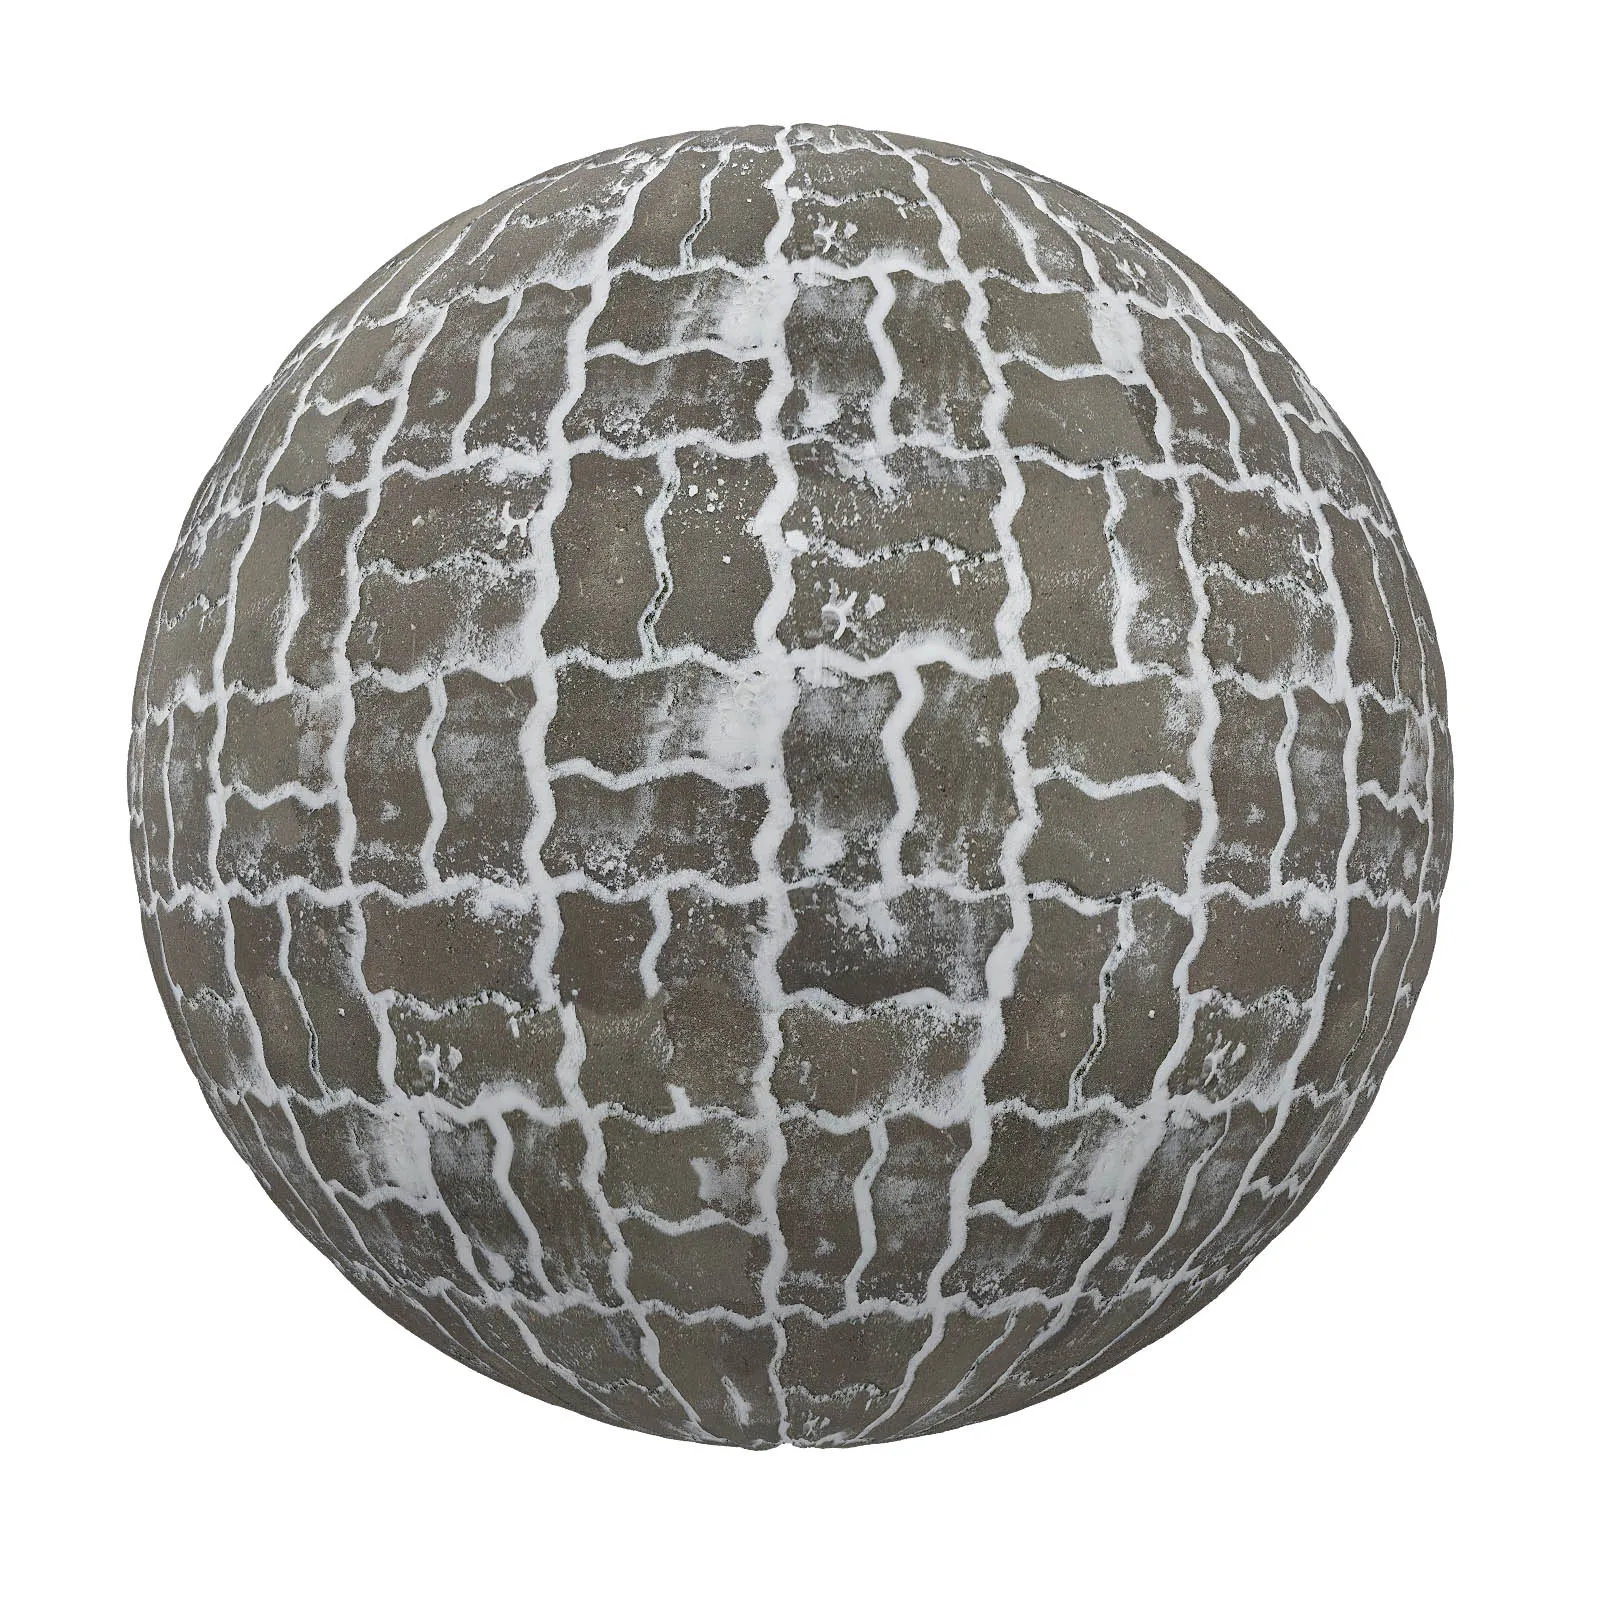 PBR CGAXIS TEXTURES – SNOW – Pavement With Snow 2